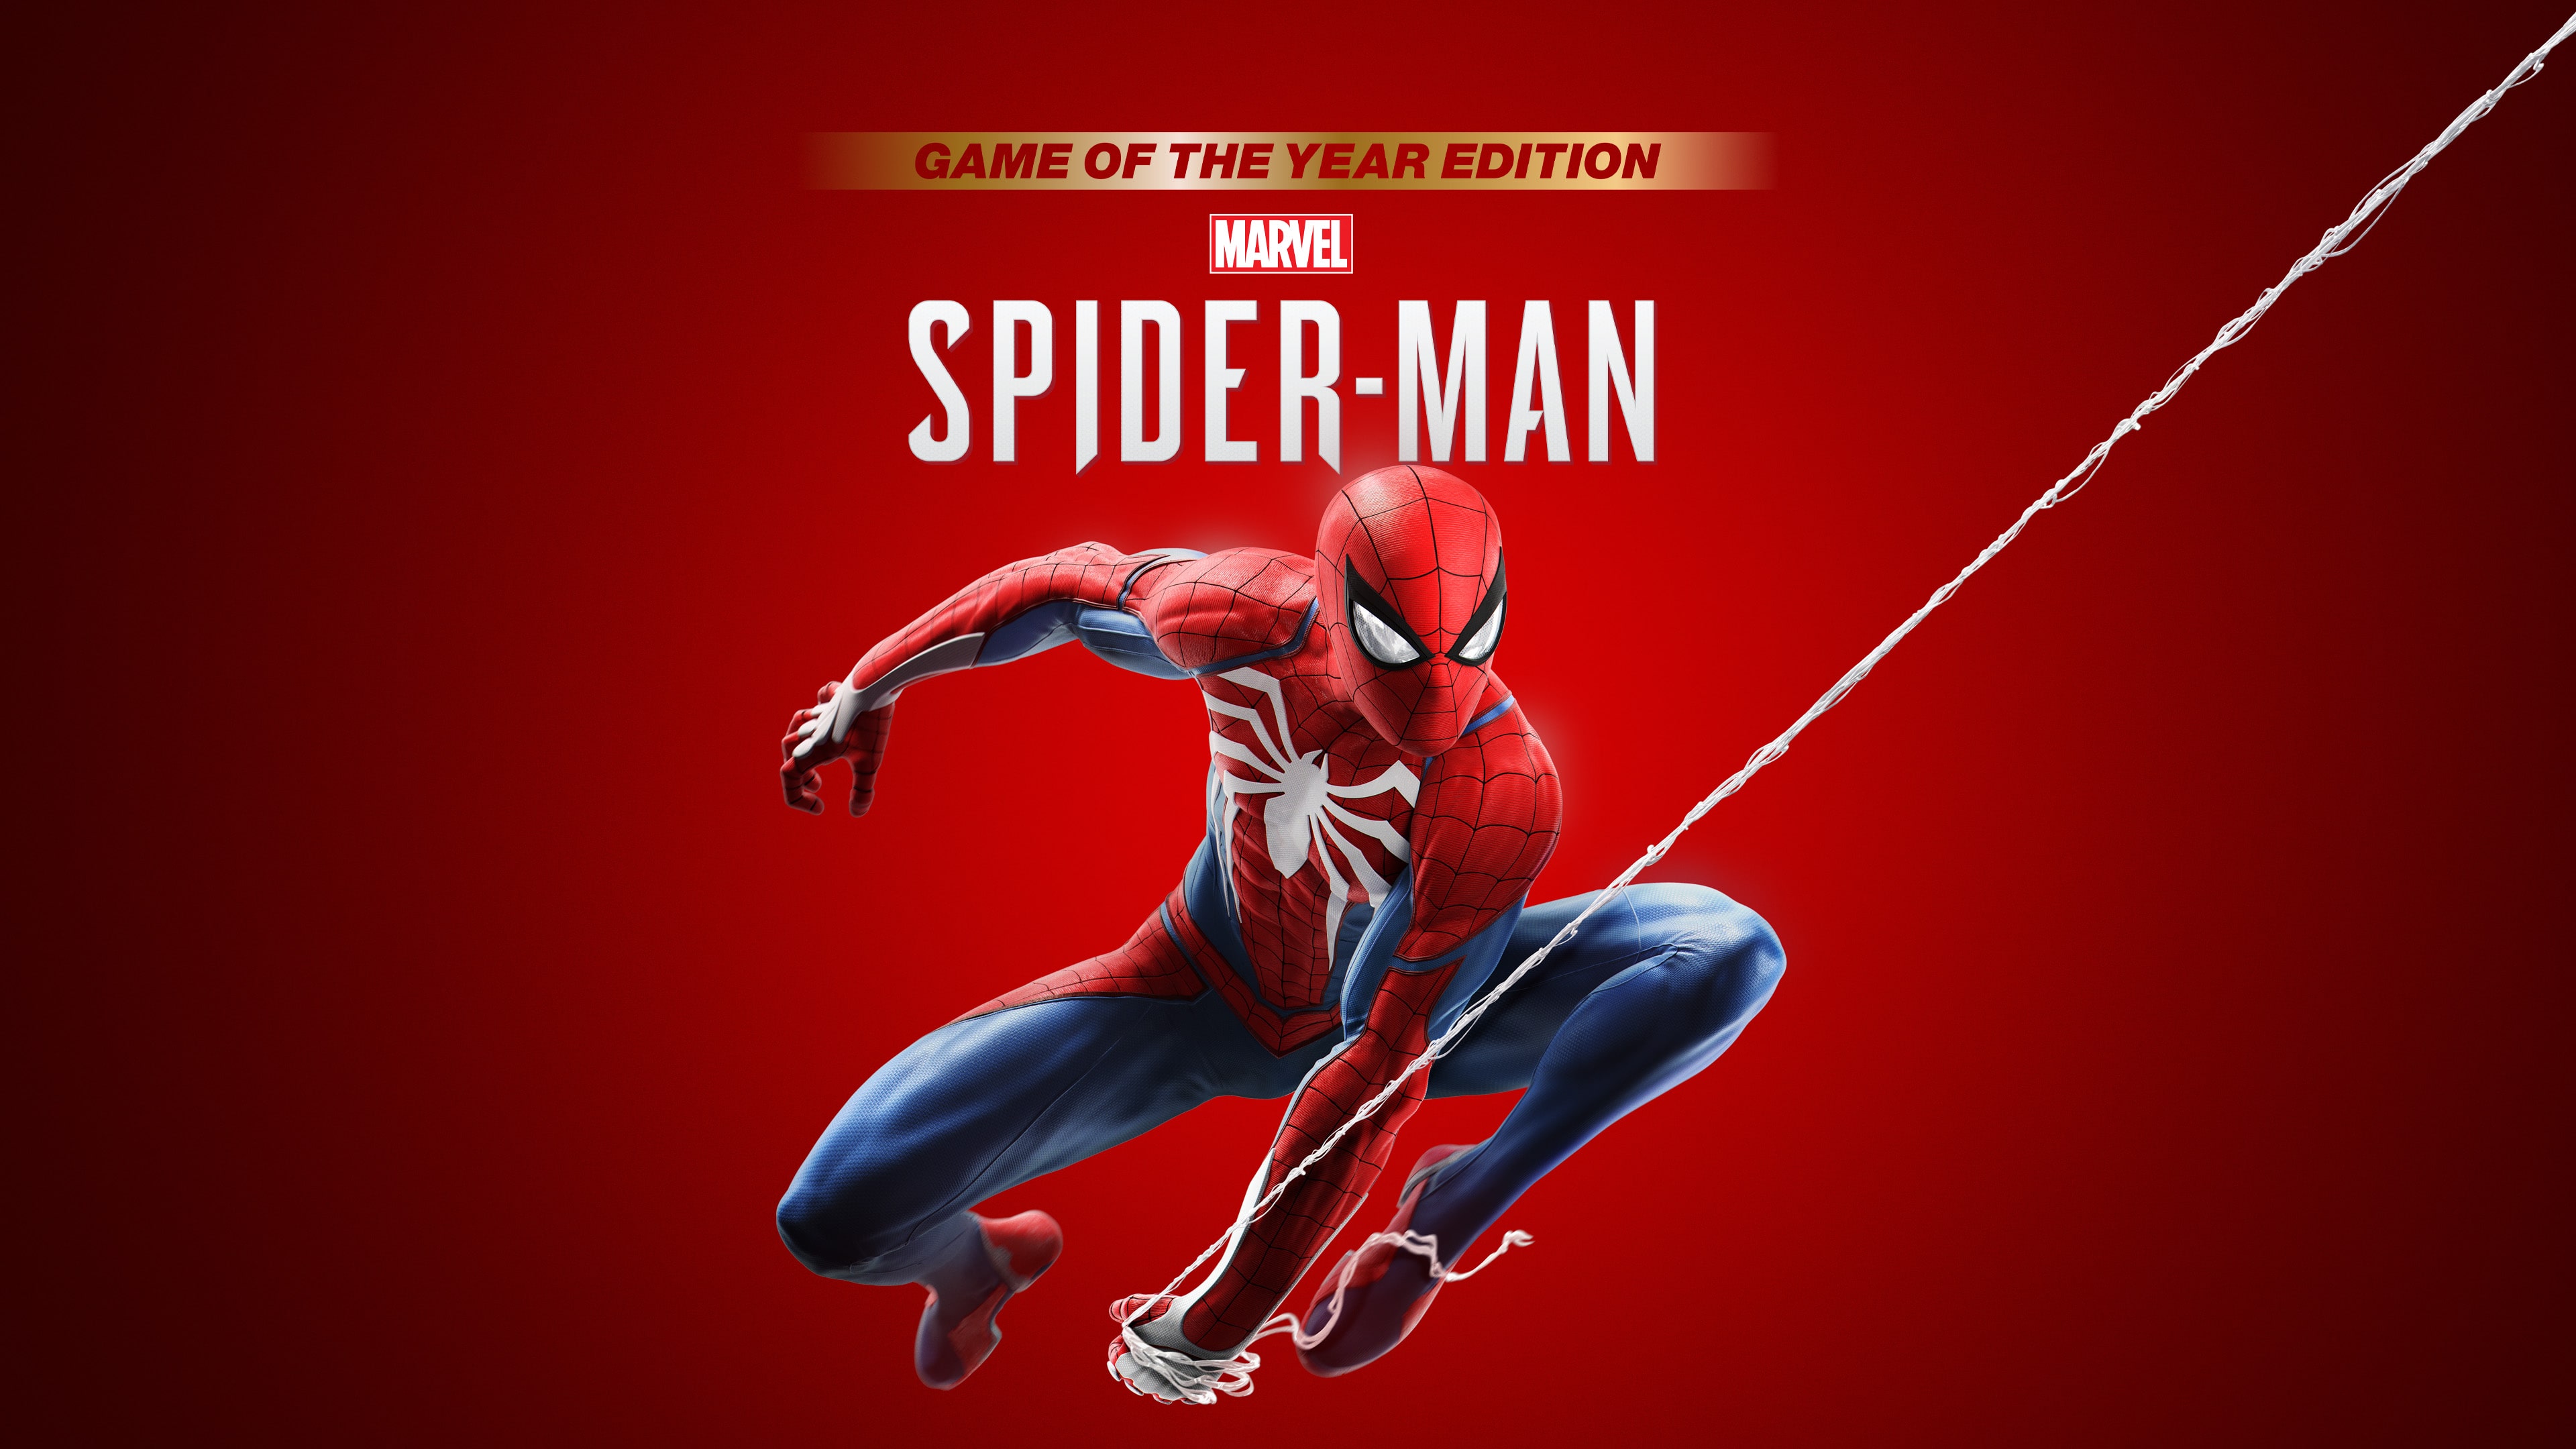 Marvel's Spider-Man Game Of The Year Edition (韩语, 繁体中文, 英语)